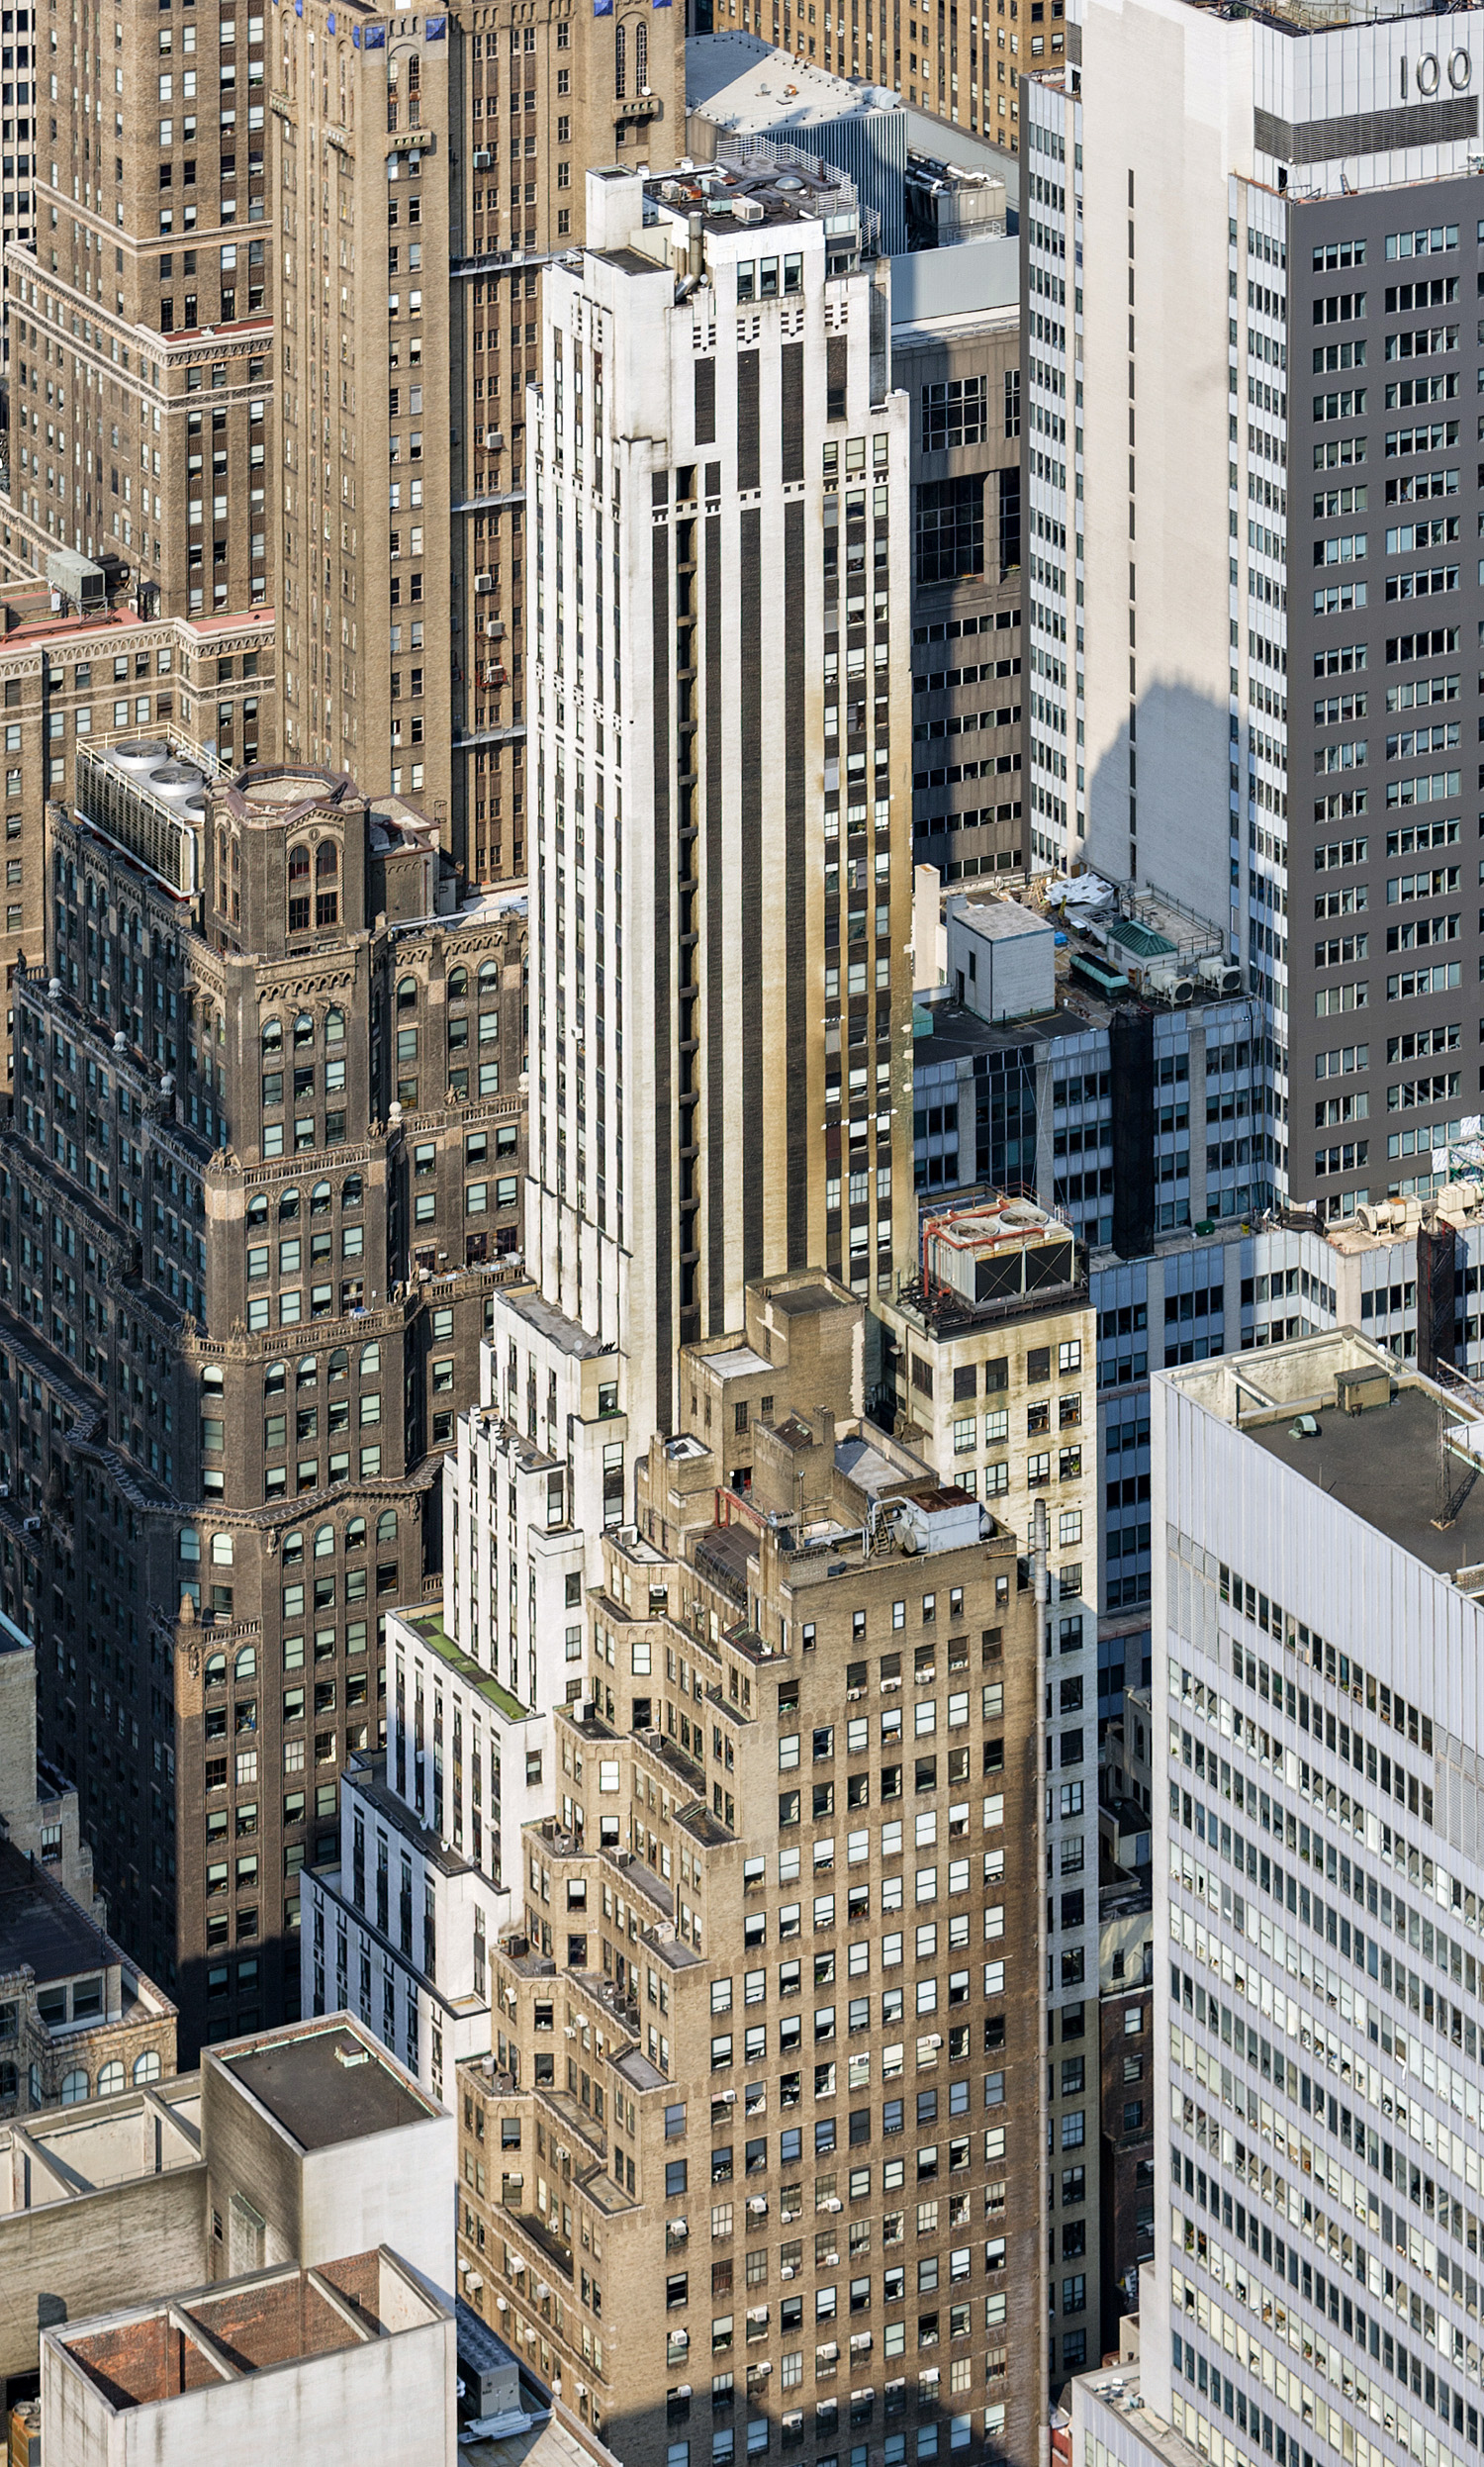 Johns-Manville Building - View from Empire State Building 